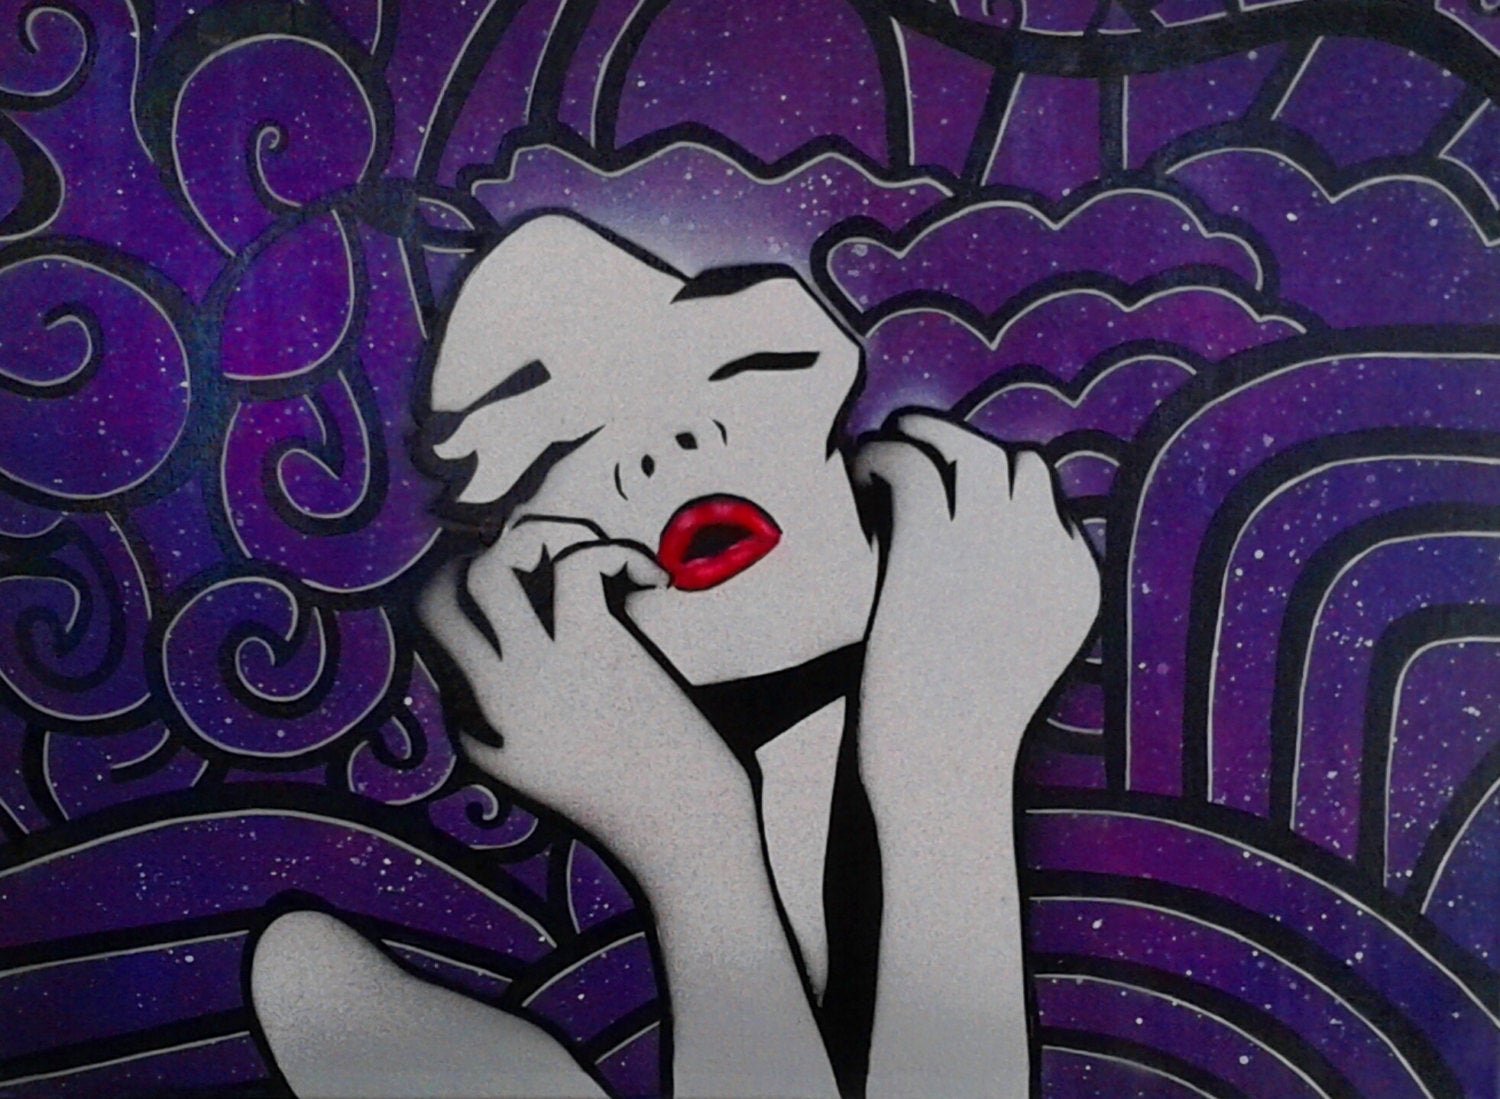 Stenciling with Spray Paint Awesome Graffiti Woman Stencil Spray Paint Art